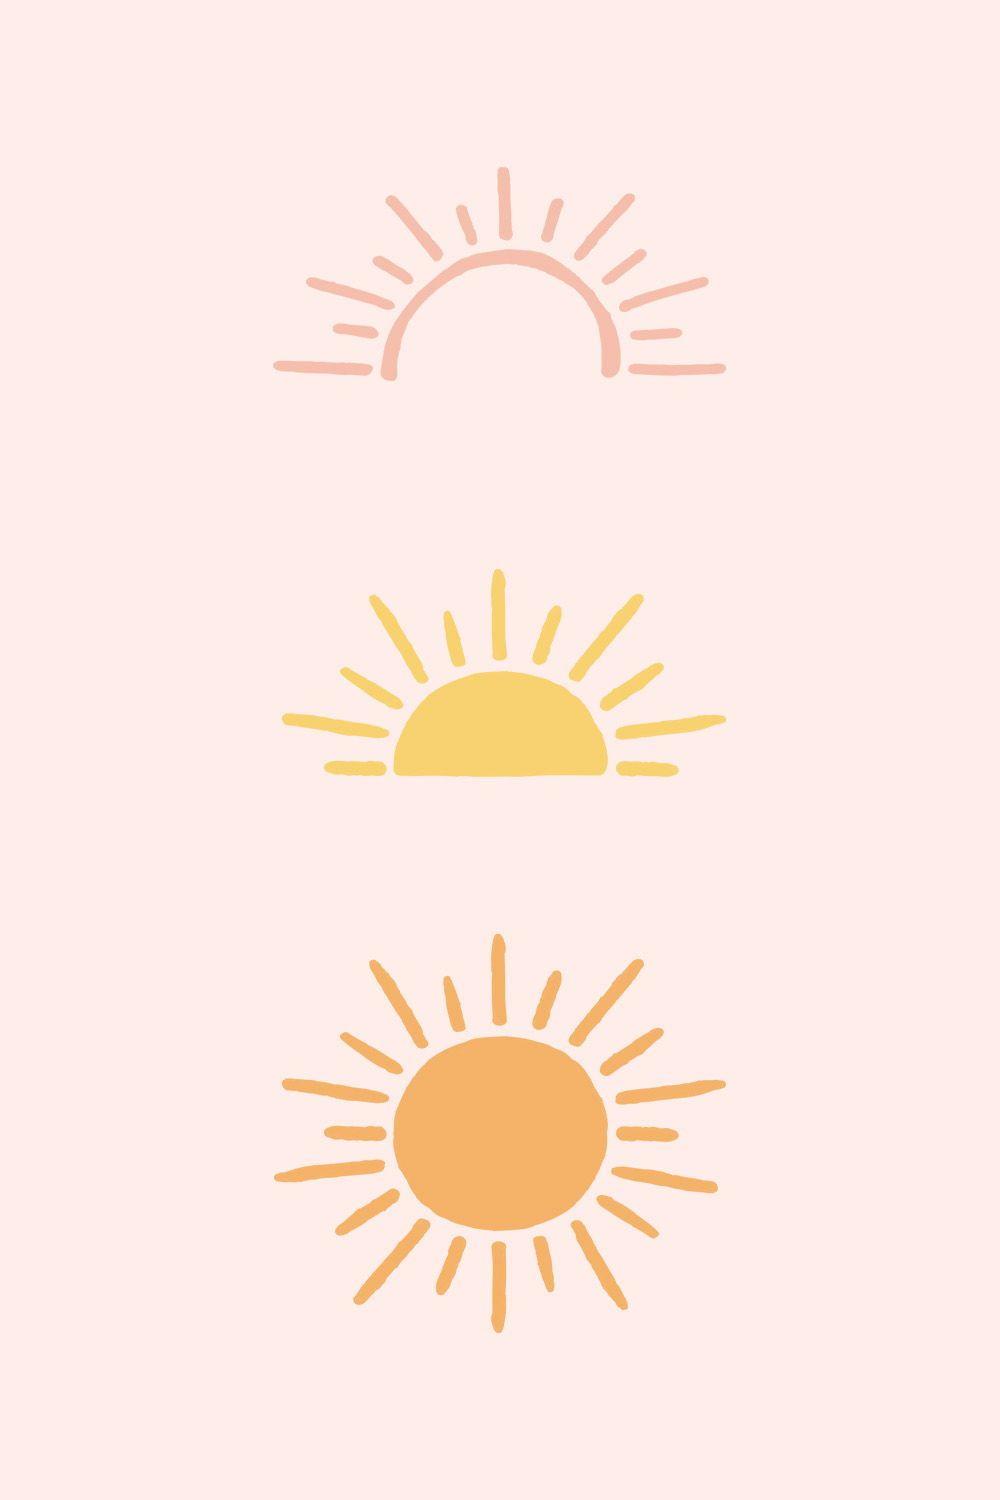 Sun Aesthetic Wallpapers Top Free Sun Aesthetic Backgrounds Wallpaperaccess